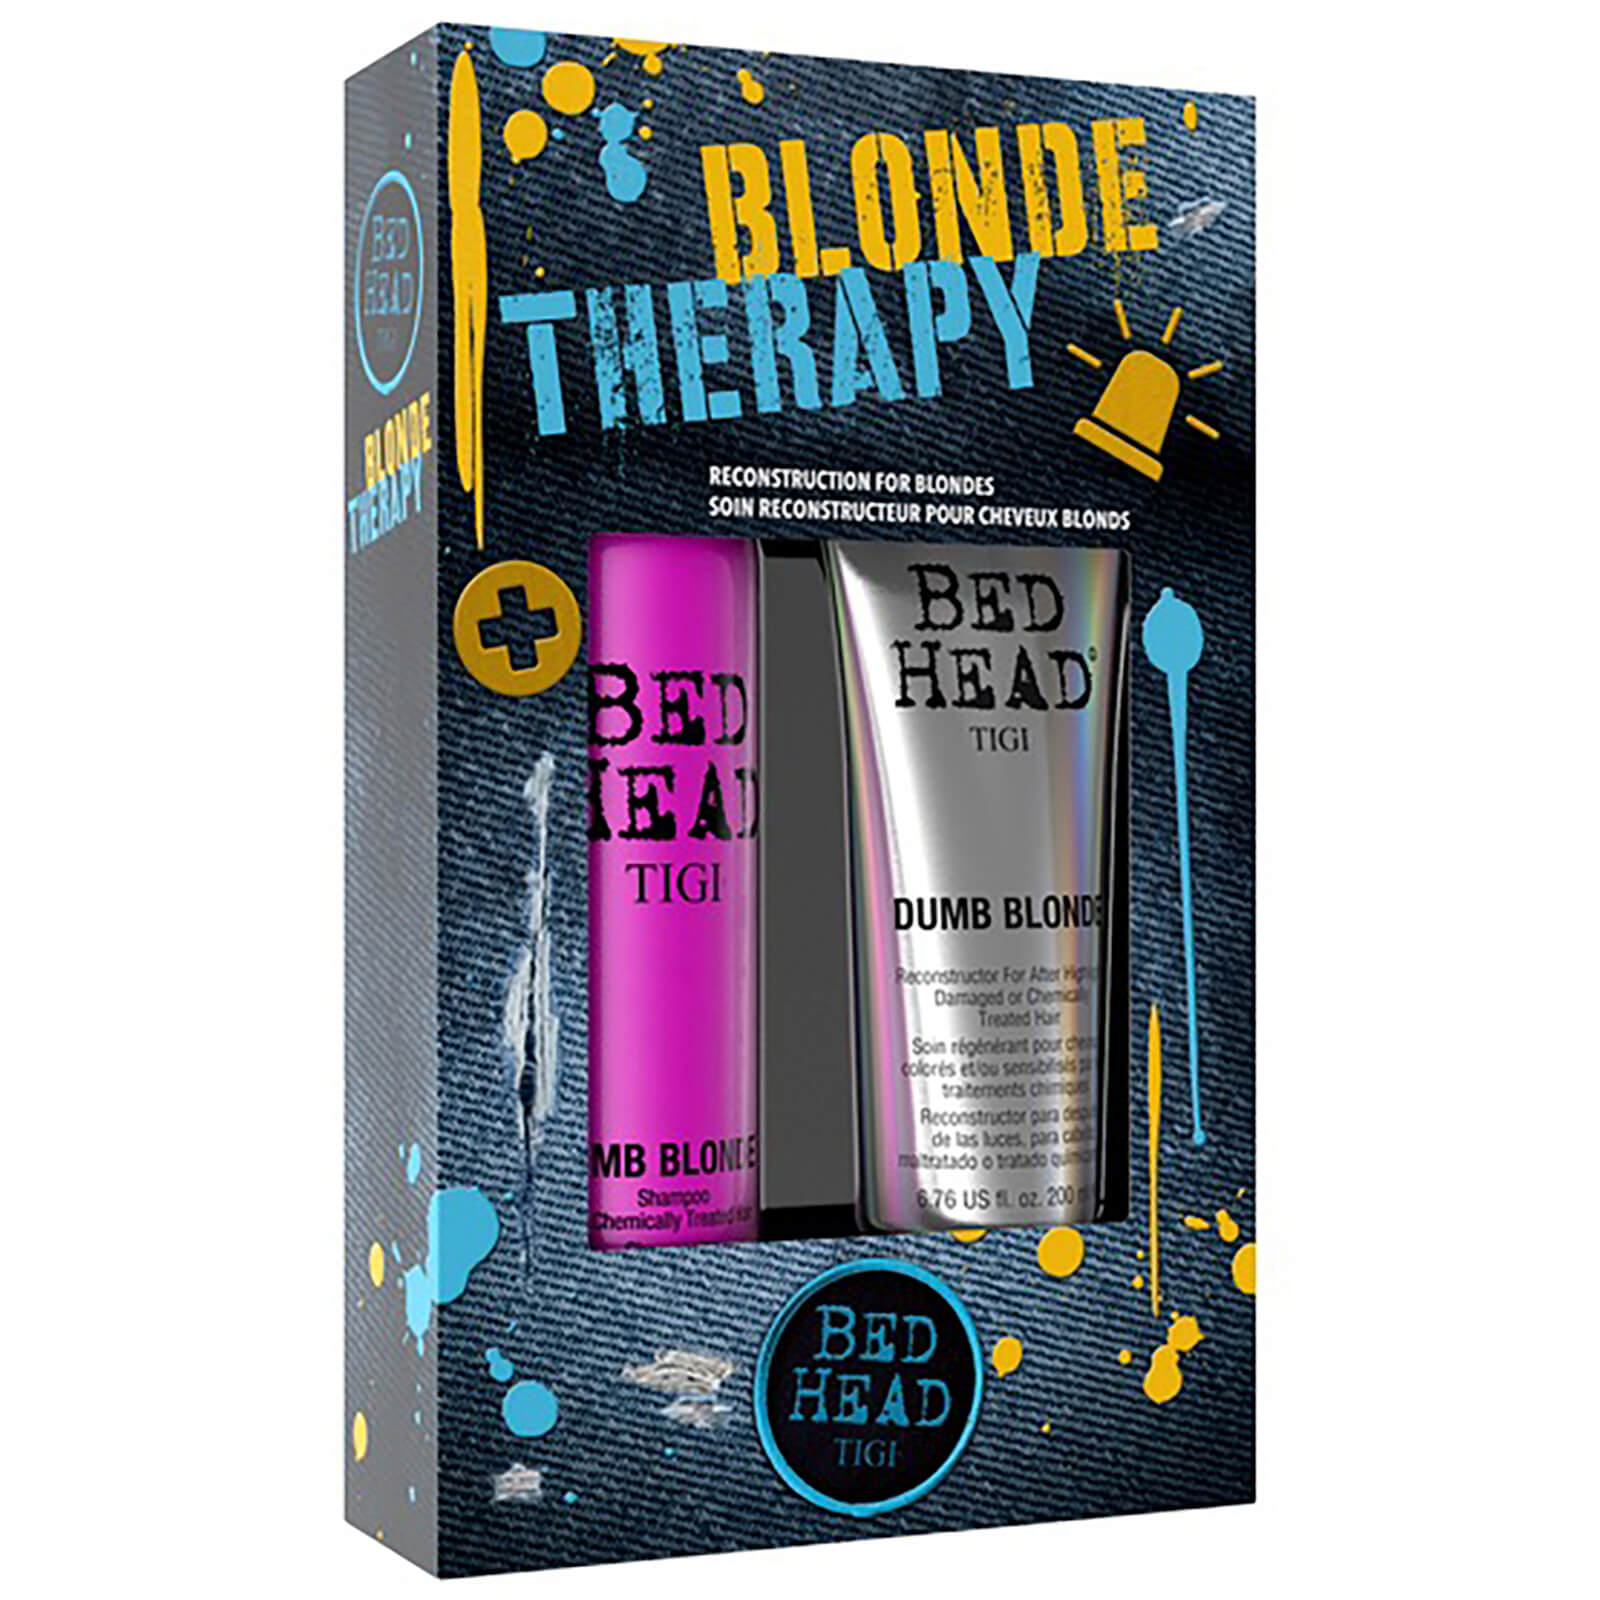 TIGI Bed Head Blonde Therapy Gift Pack